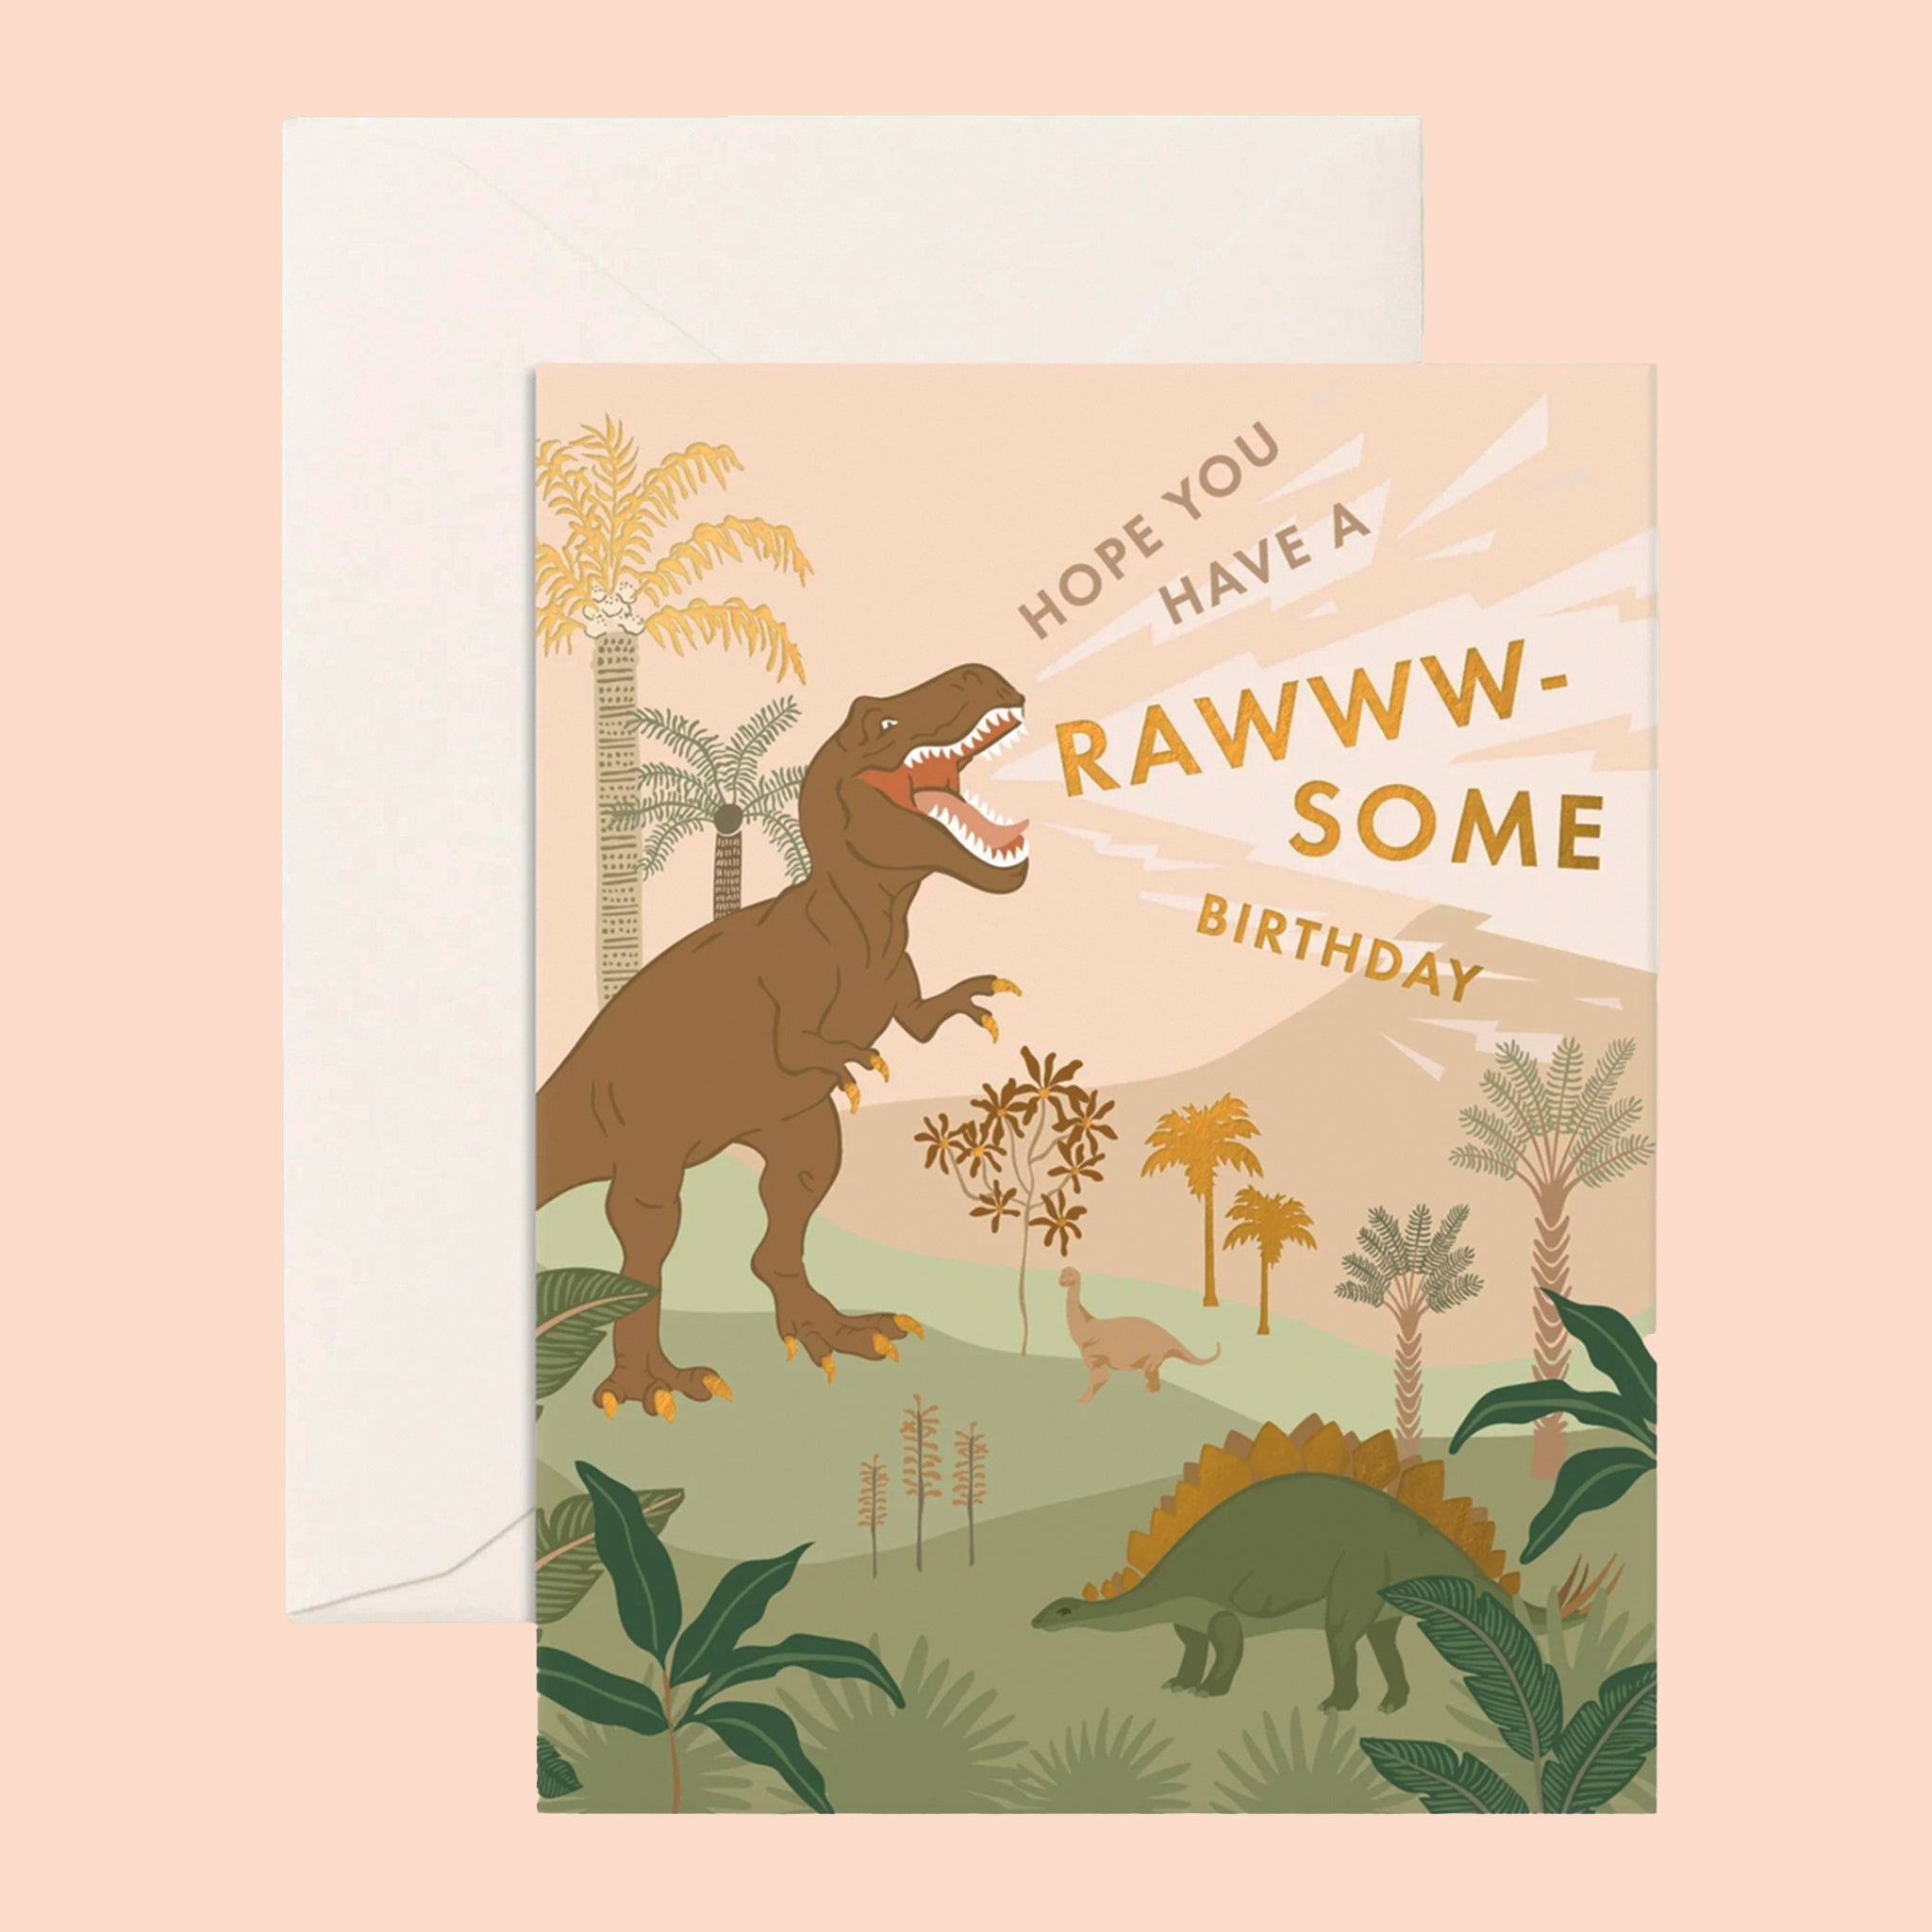 On a peachy background is a birthday card with a graphic of dinosaurs in a tropical landscape with gold foiled text that reads, &quot;Hope You Have A Rawww-Some Birthday&quot;.